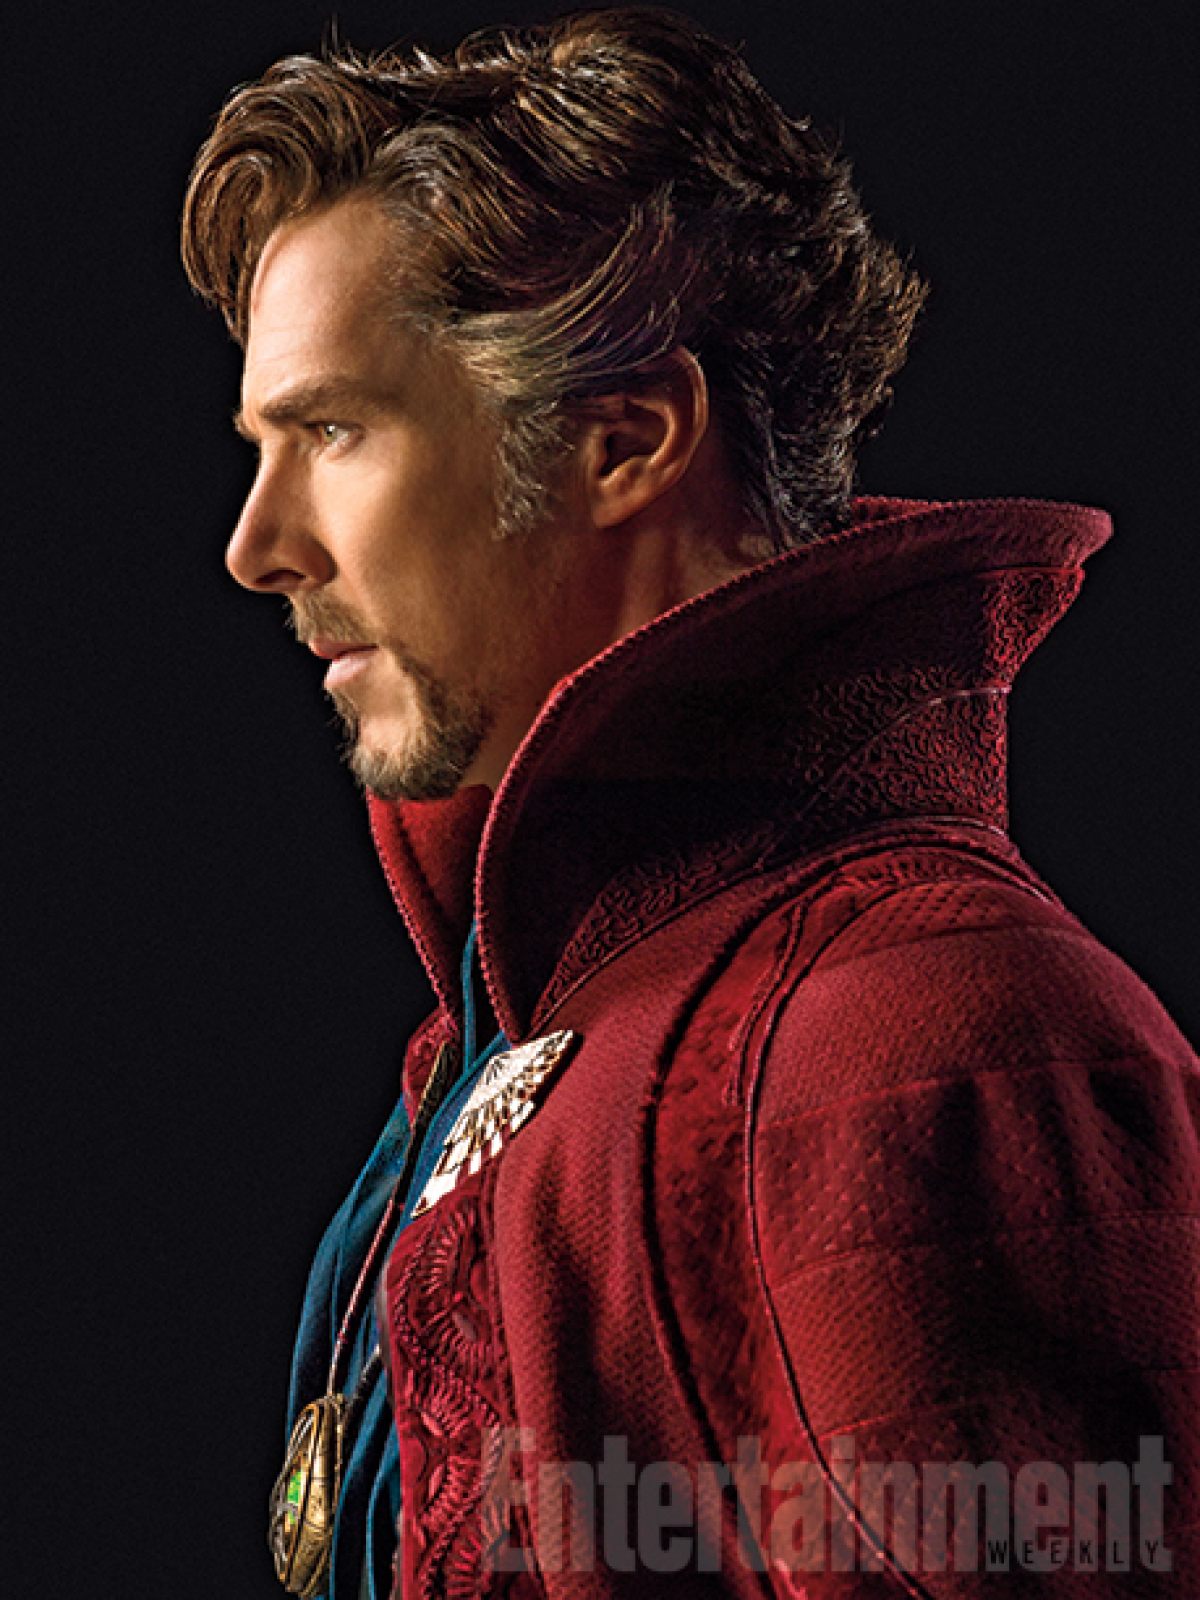 Benedict Cumberbatch Covers Entertainment Weekly as Doctor Strange